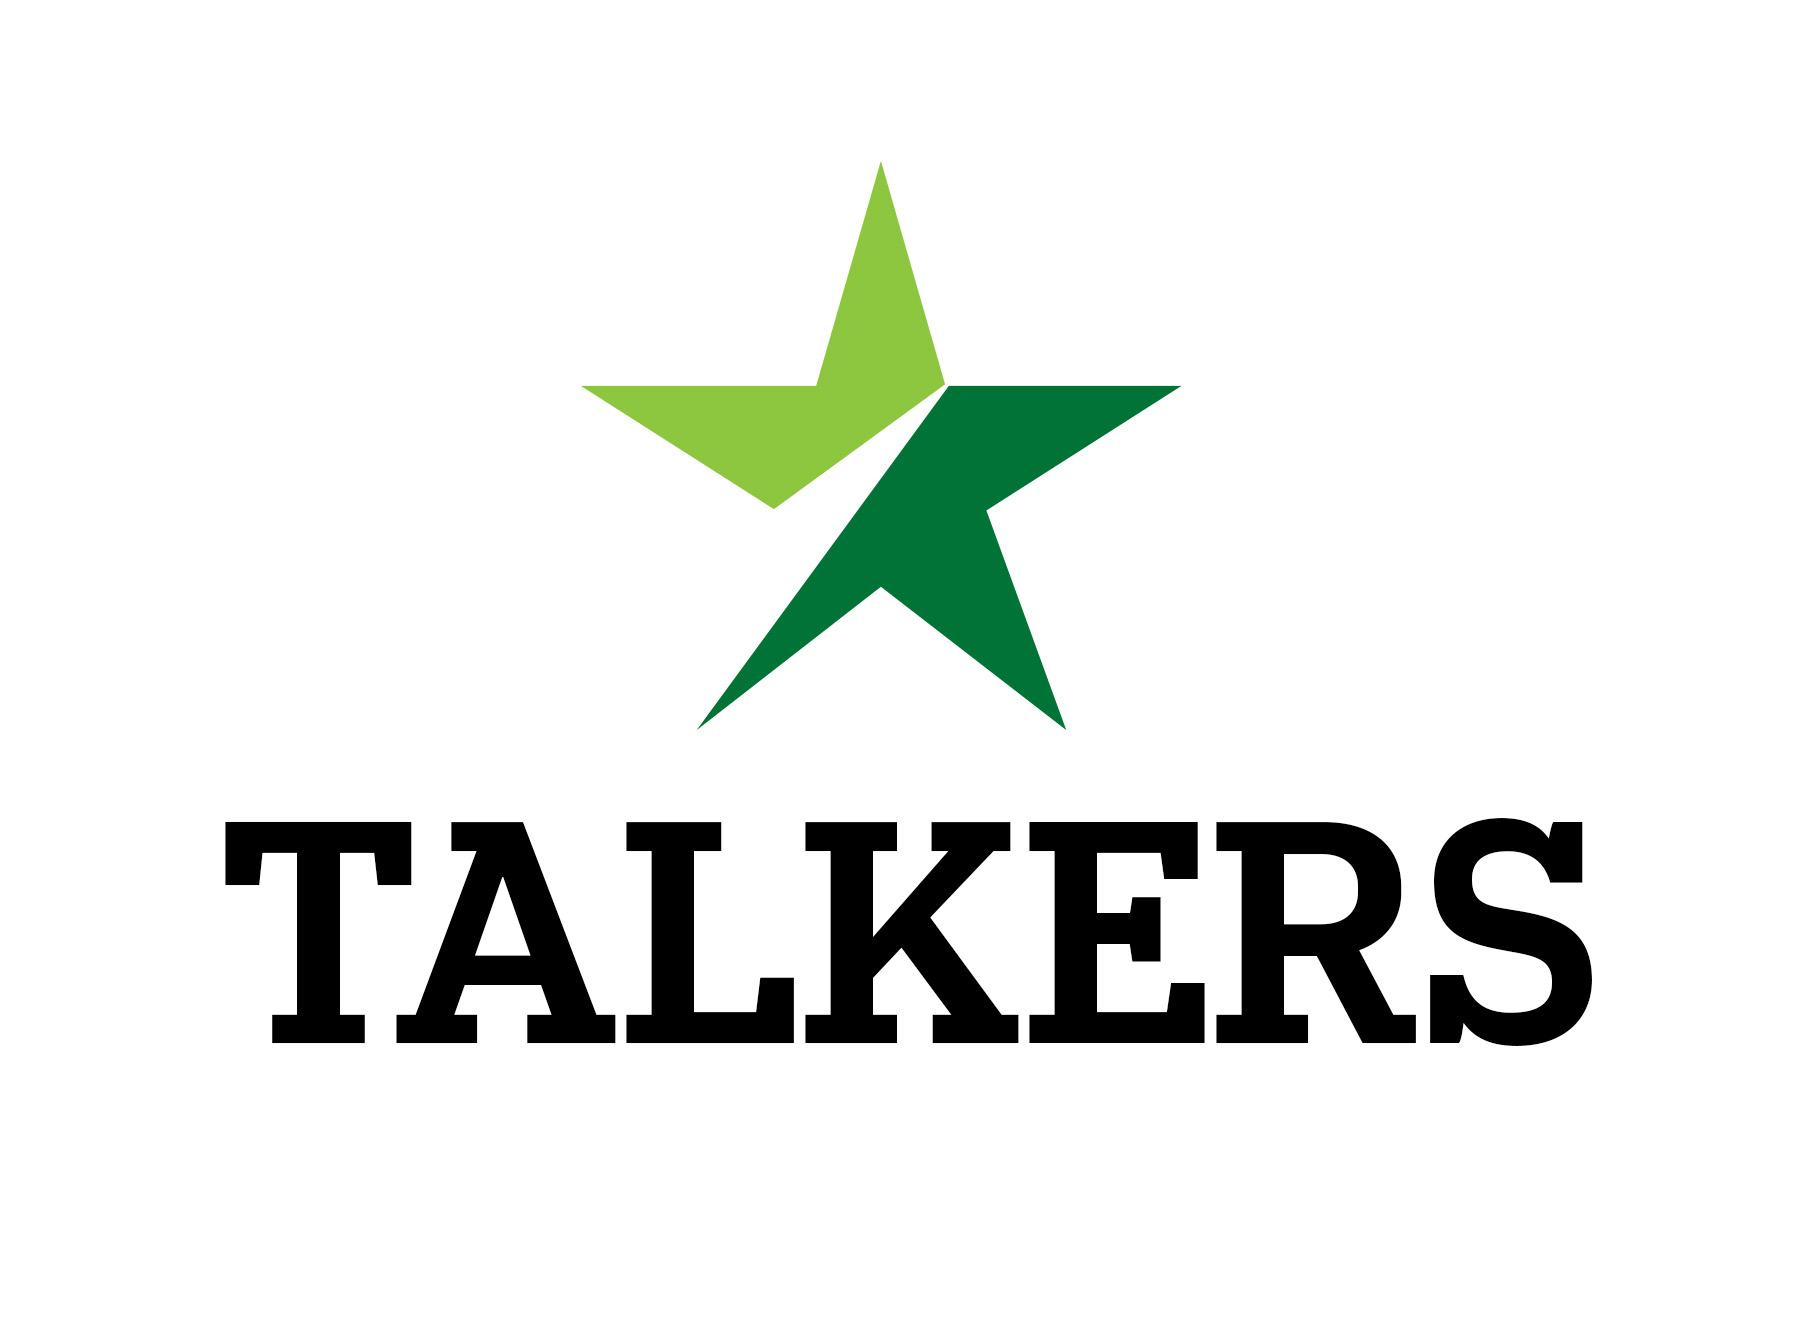 Sign up for Talkers, our daily tipsheet of bite-sized newsy nuggets